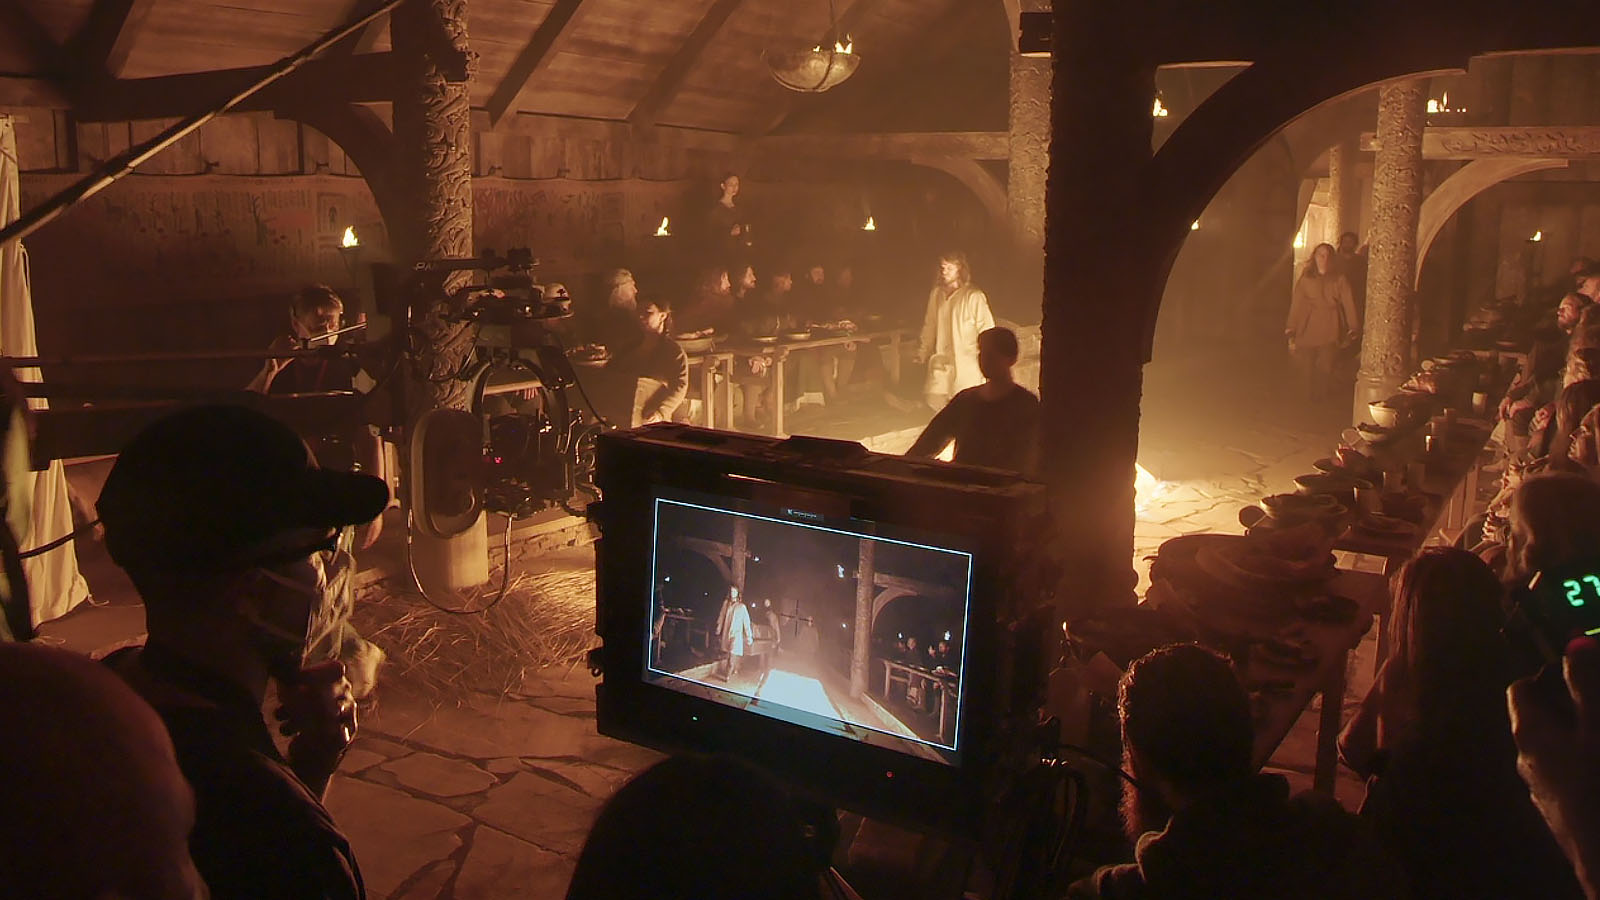 Behind the scenes of the moot hall in The Northman. Image © Focus Features